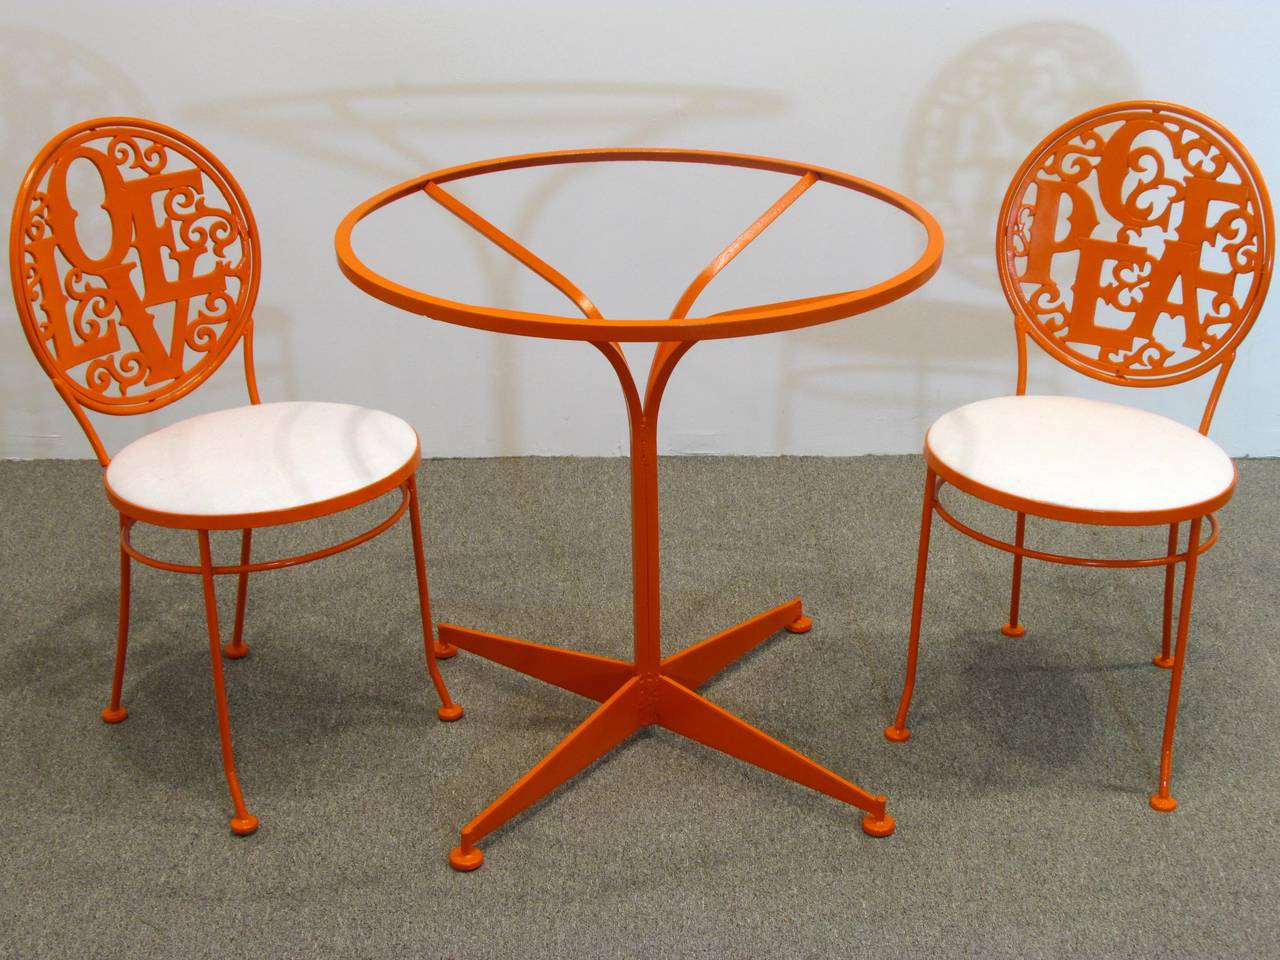 Enameled orange Cafe set includes two chairs and table one chair back spells LOVE and one PEACE